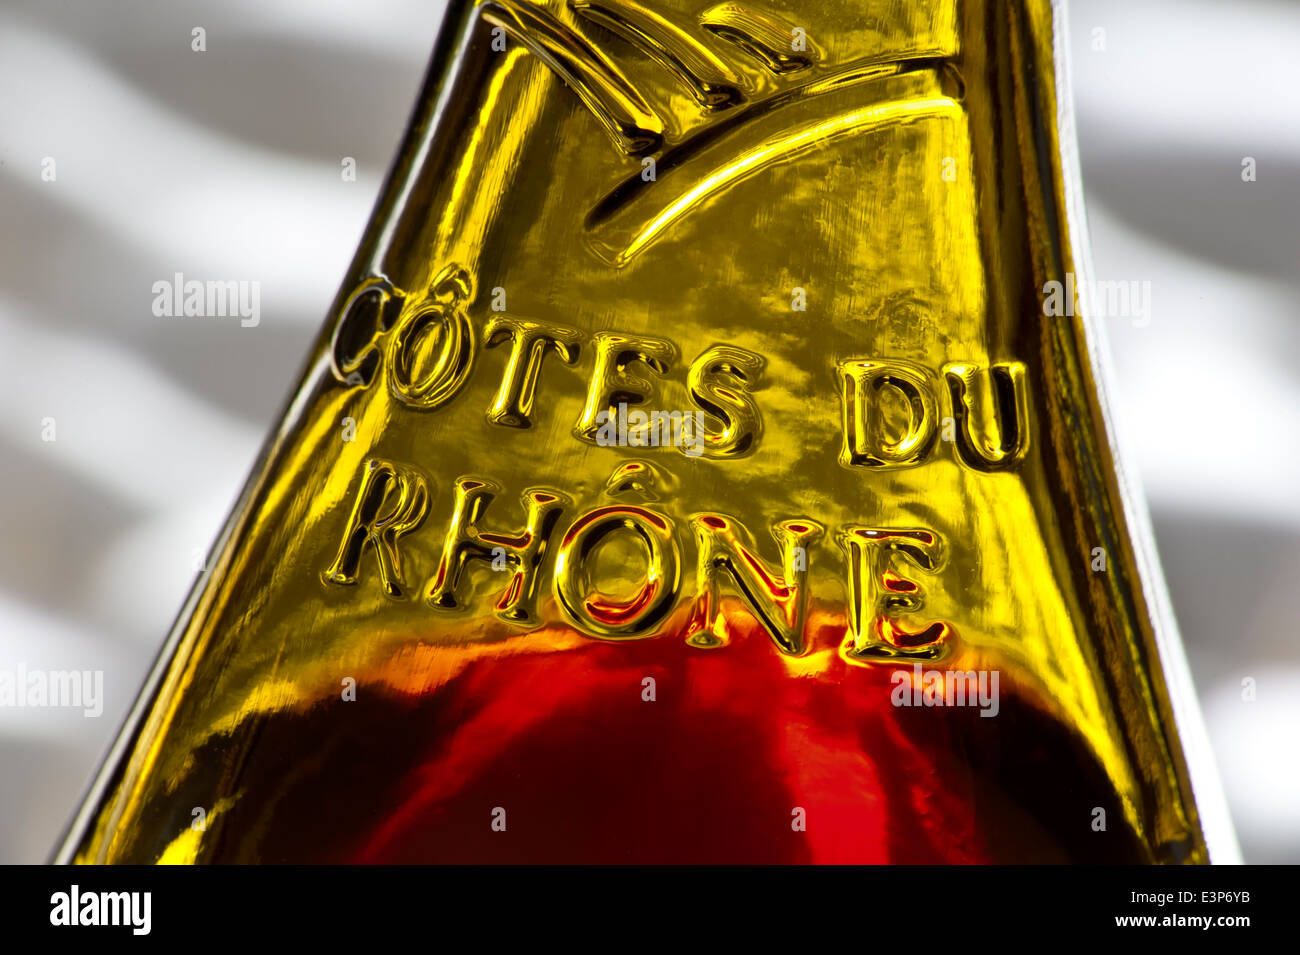 Close view on the glass relief label on a bottle of French Cotes du Rhone red wine Stock Photo